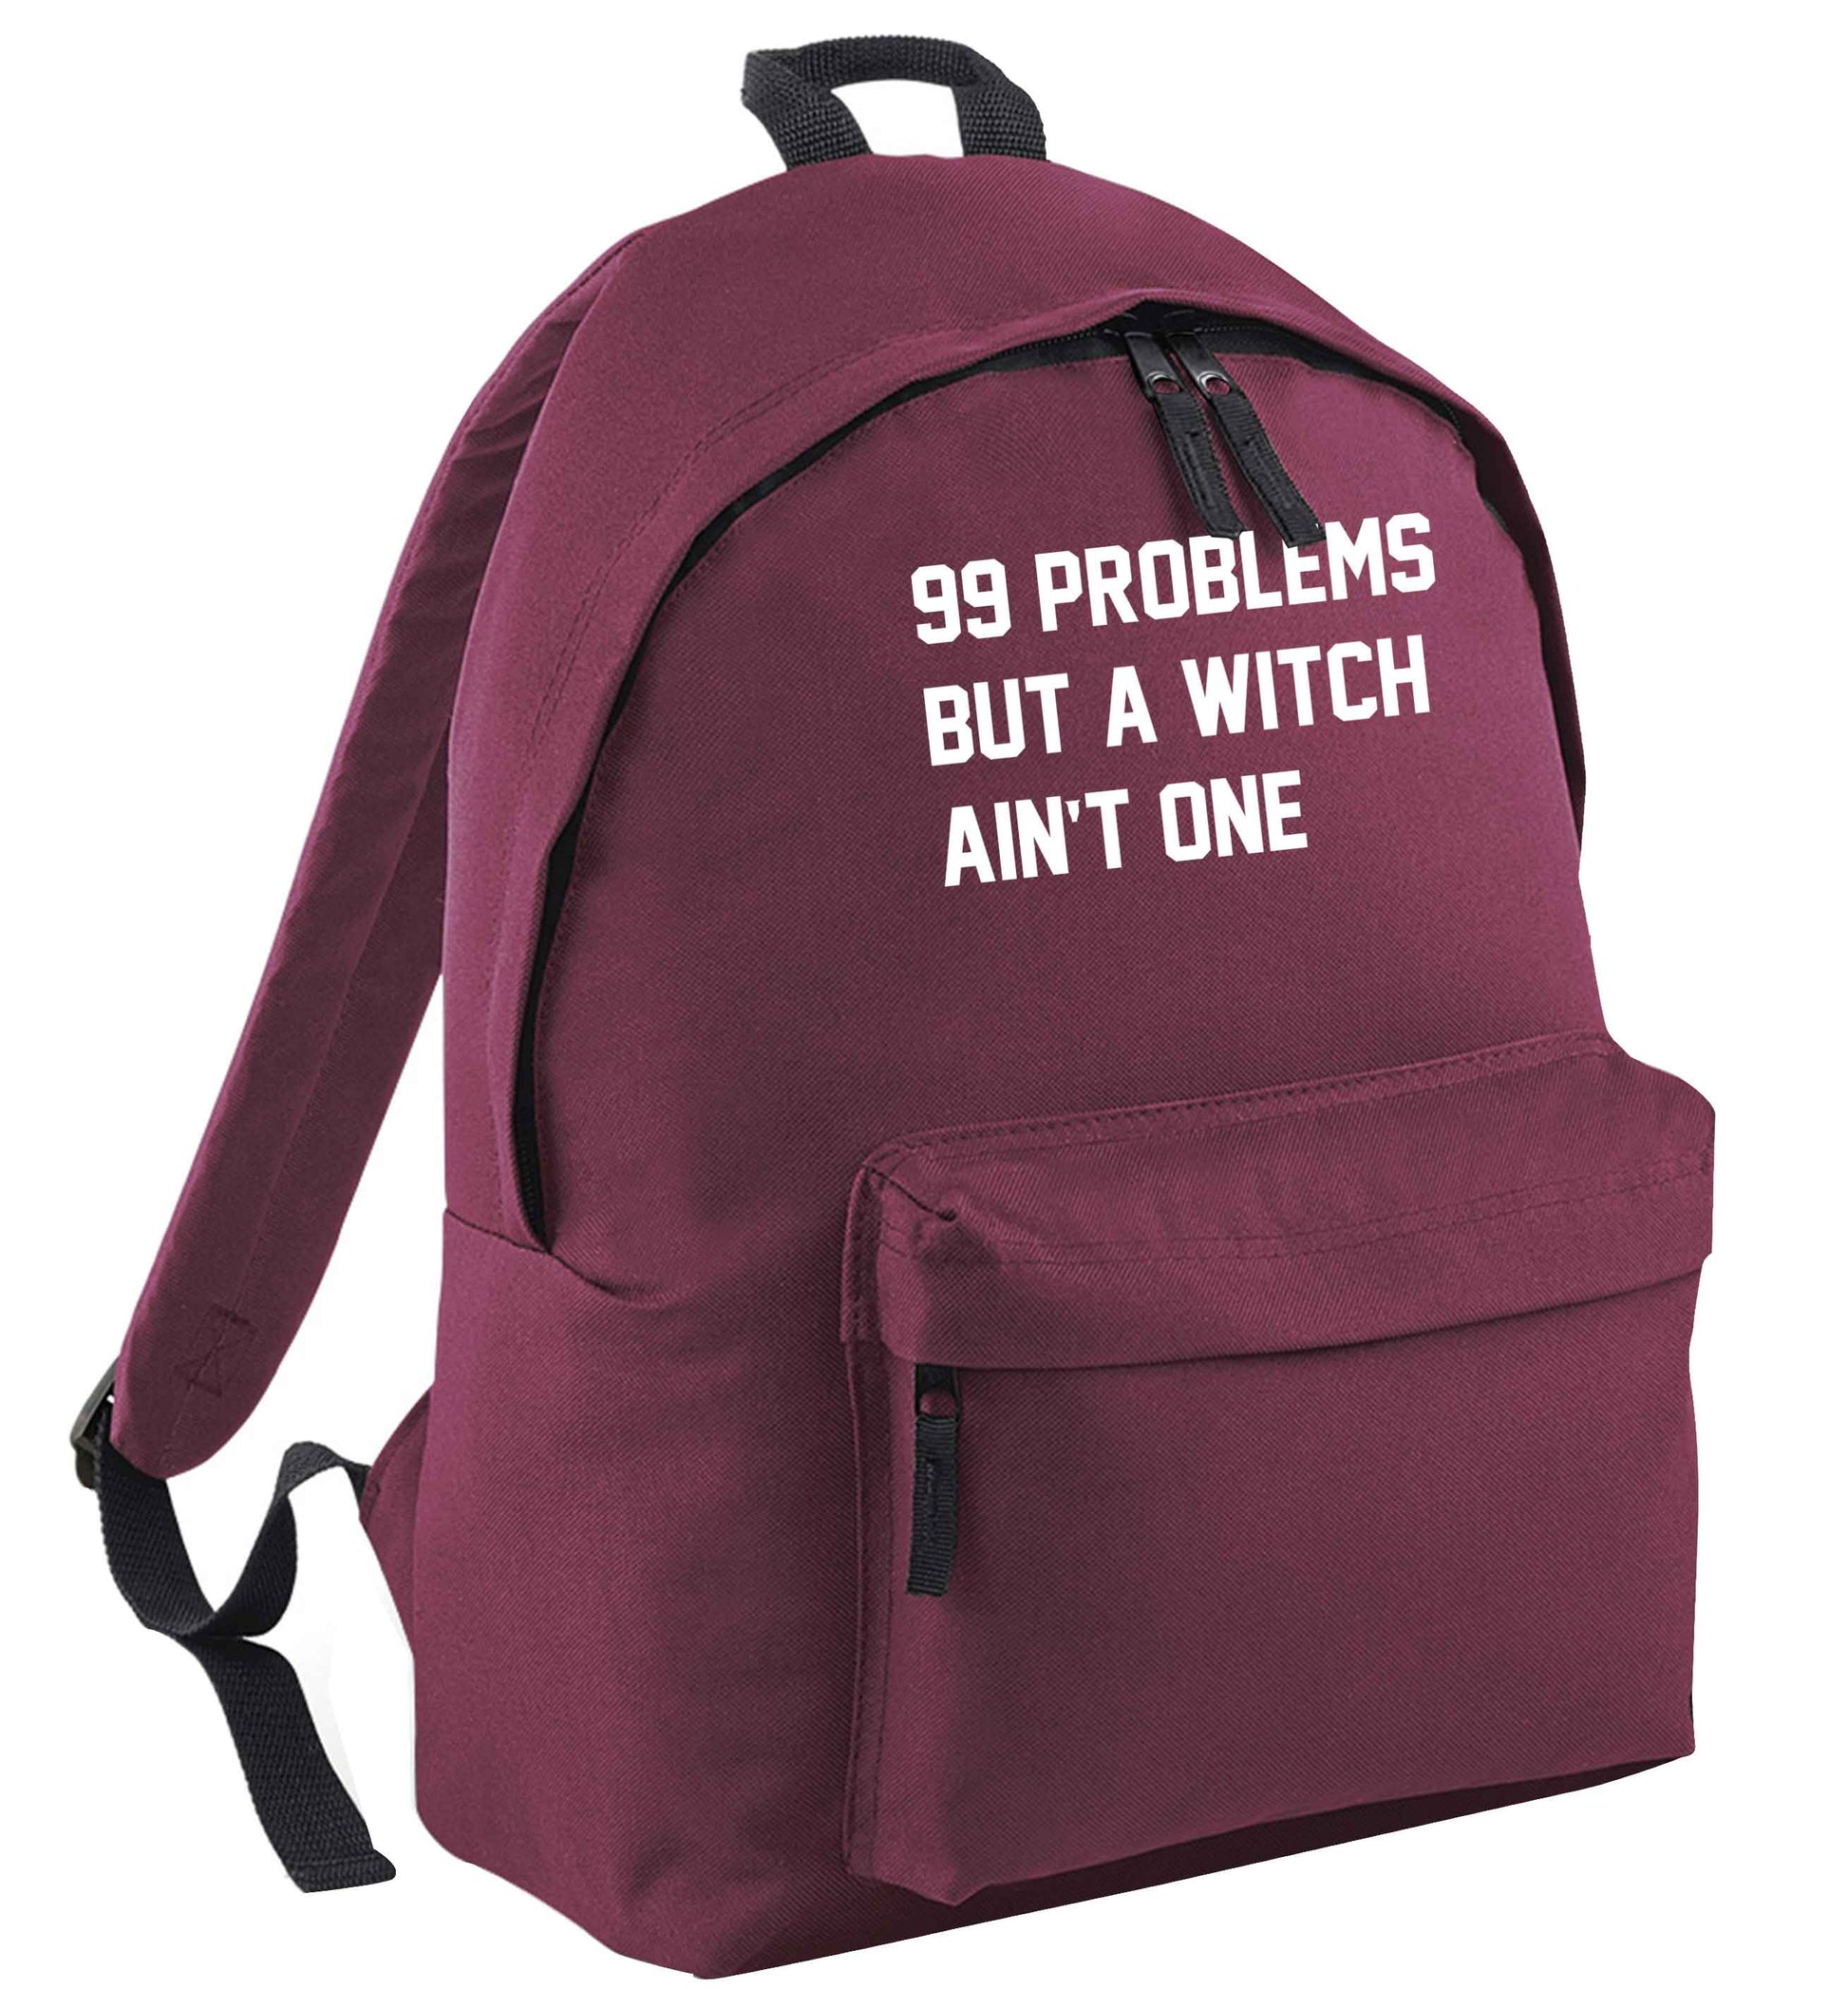 99 Problems but a witch aint one | Children's backpack